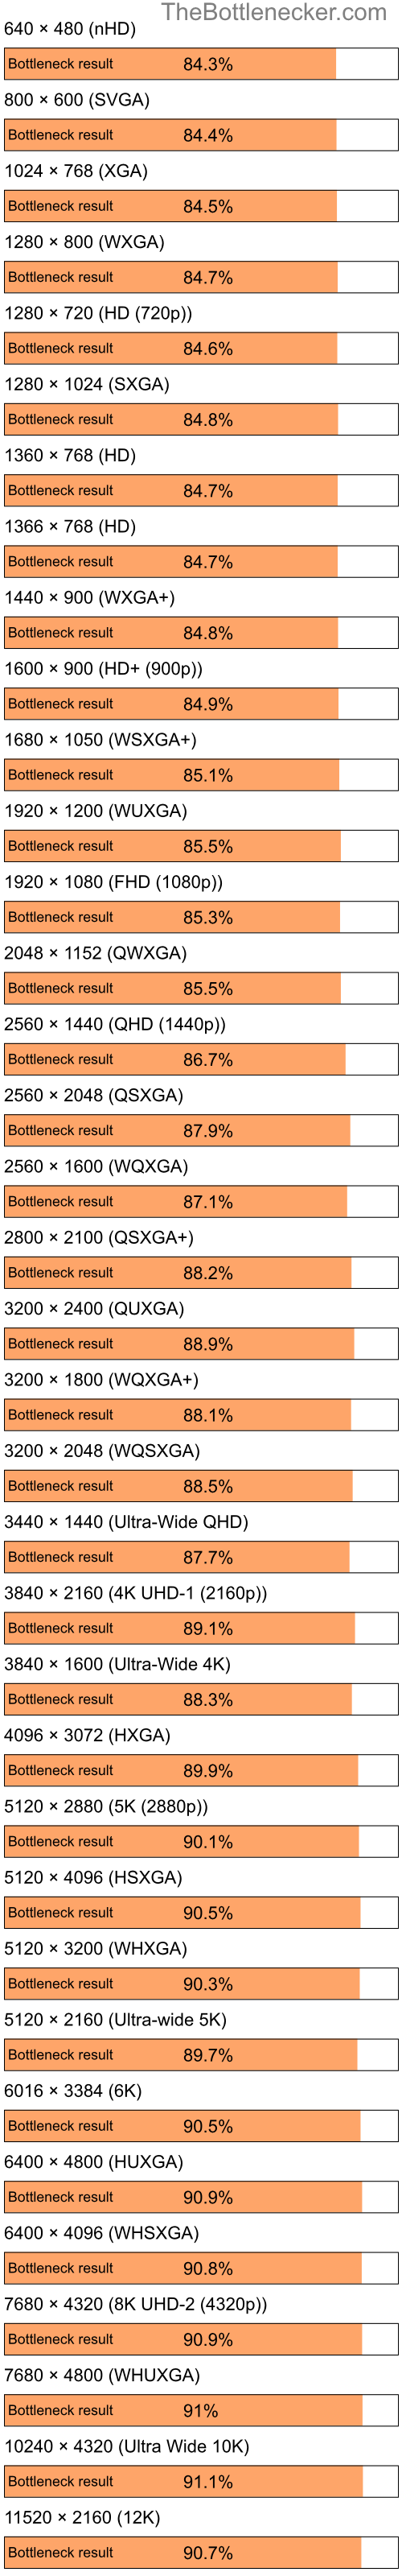 Bottleneck results by resolution for Intel Atom Z520 and NVIDIA GeForce 6150 in Graphic Card Intense Tasks